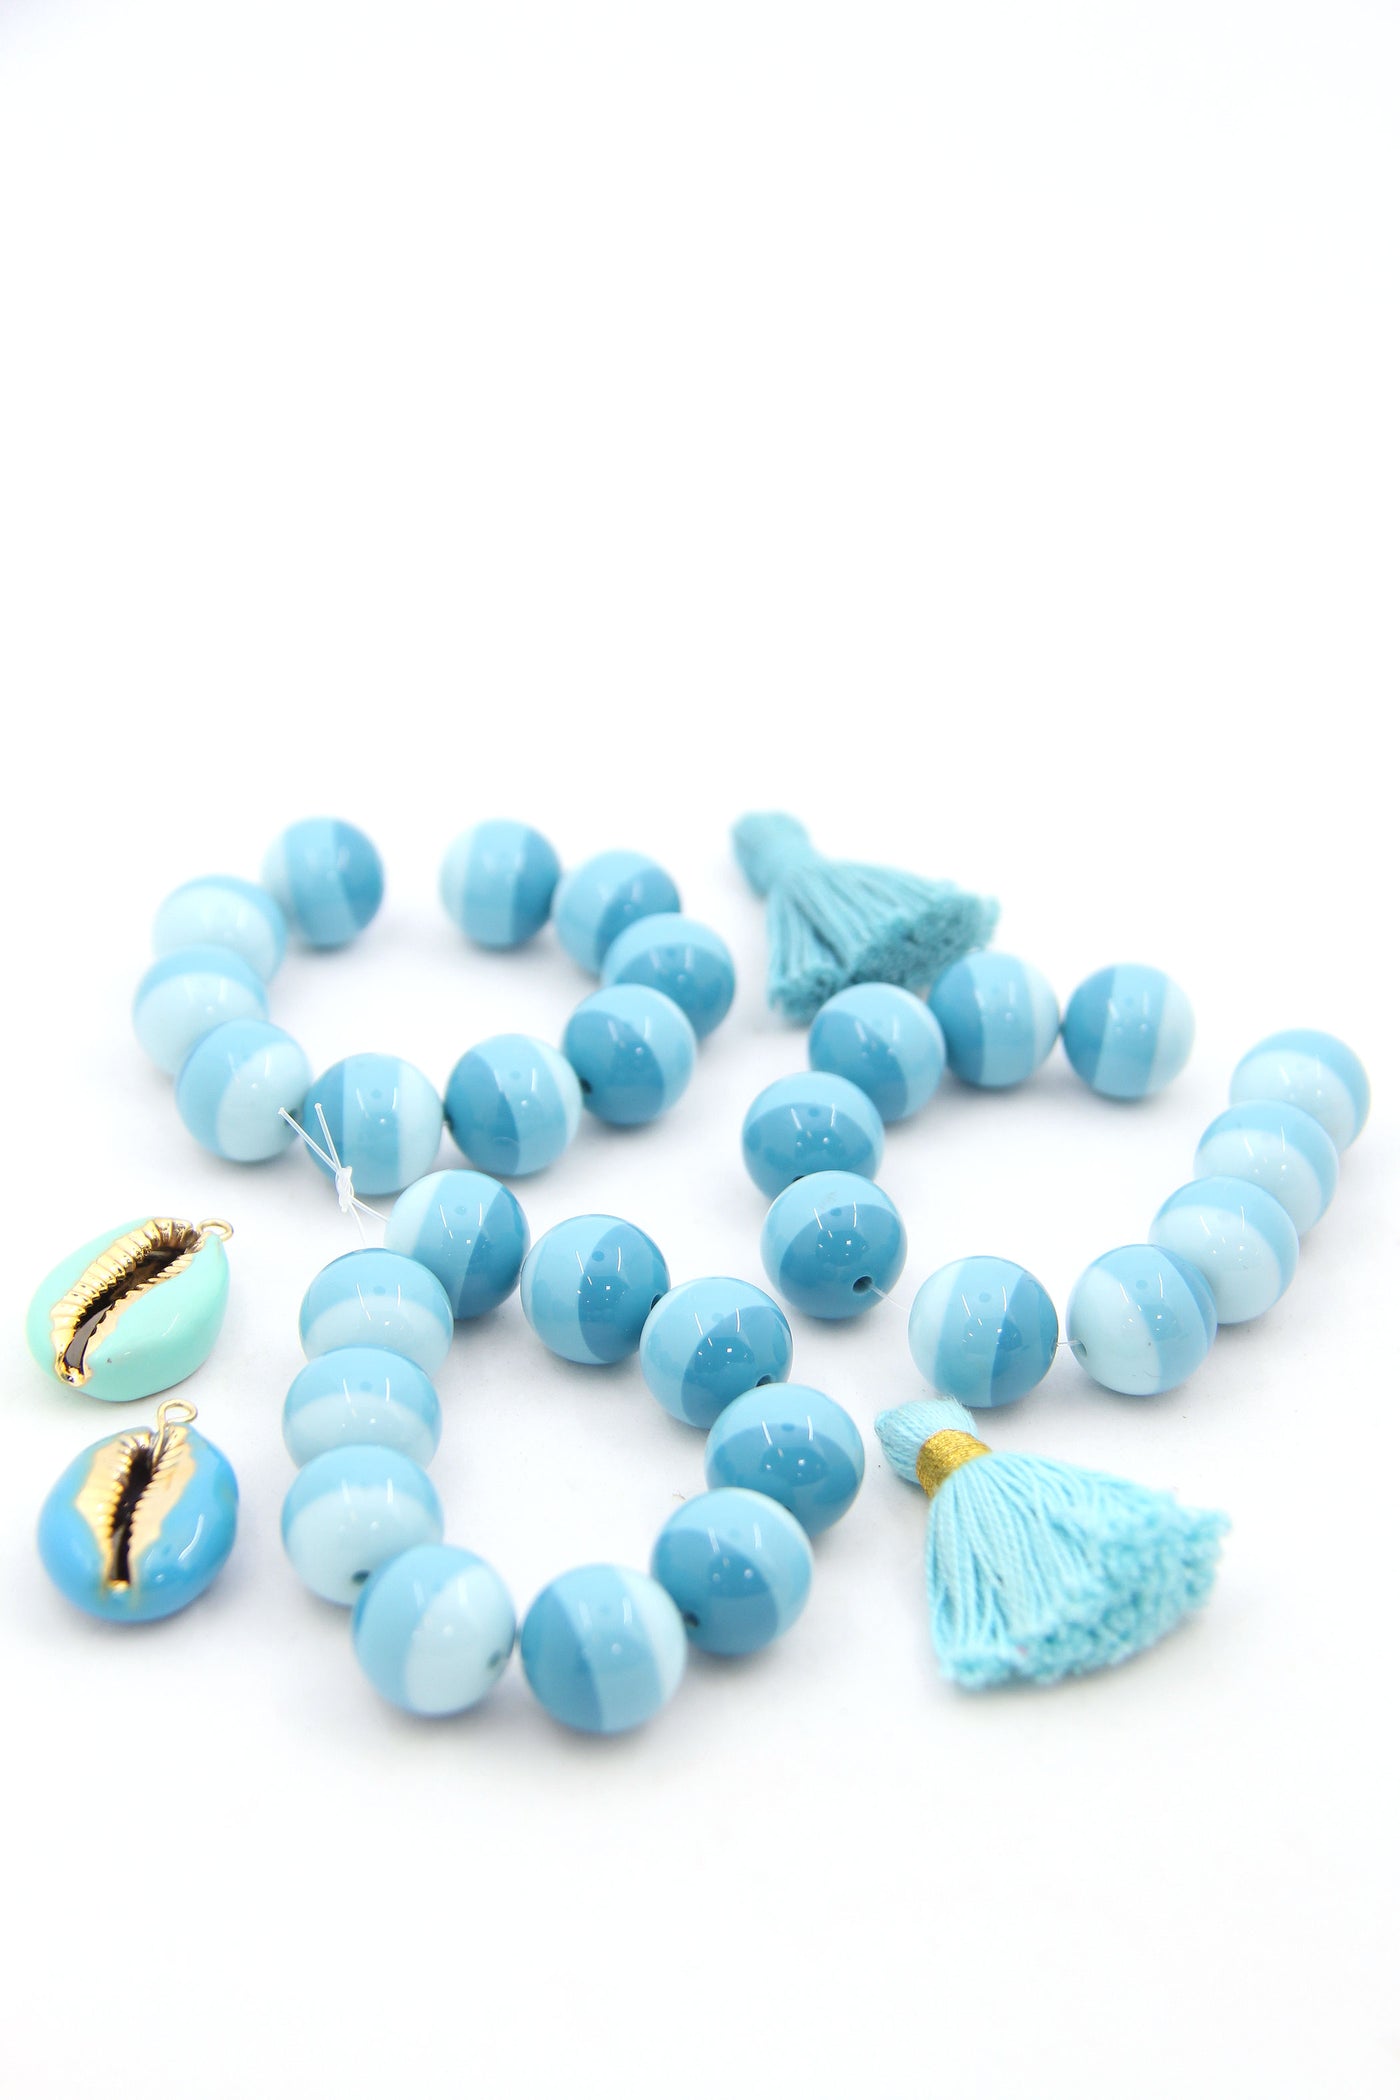 Blue Striped Italian Poly Resin Round Beads, 14mm, 10 Beads, Blue beads for mermaid jewelry